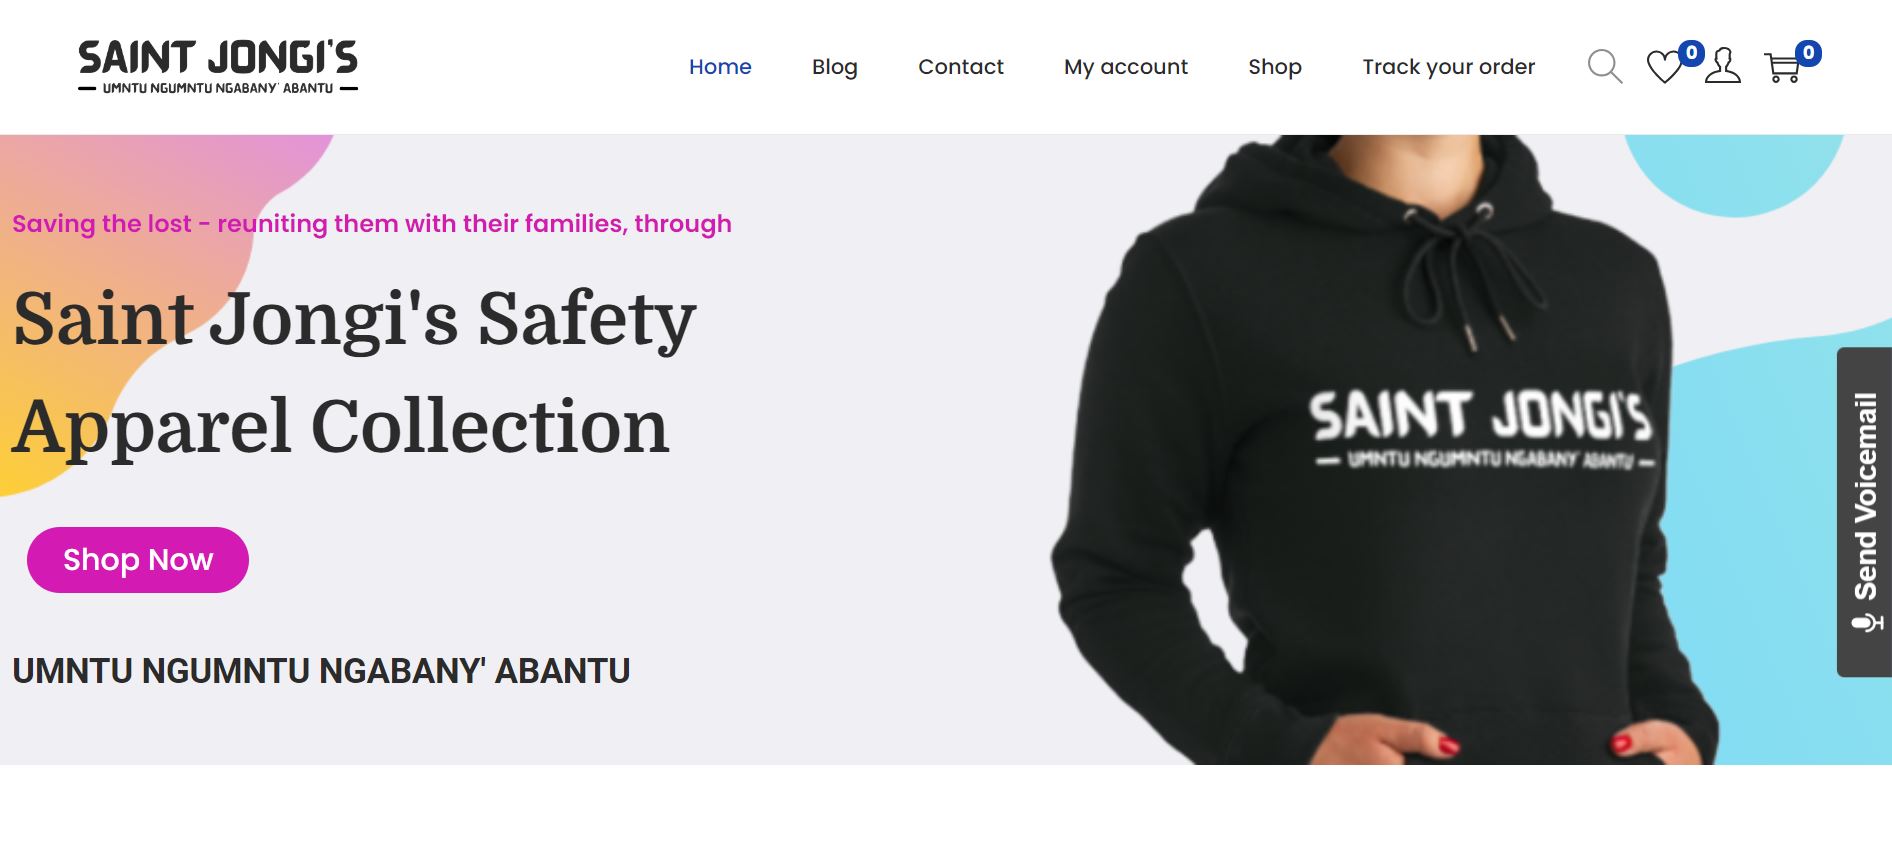 Home - St Jongi's Safety Apparel Online Store